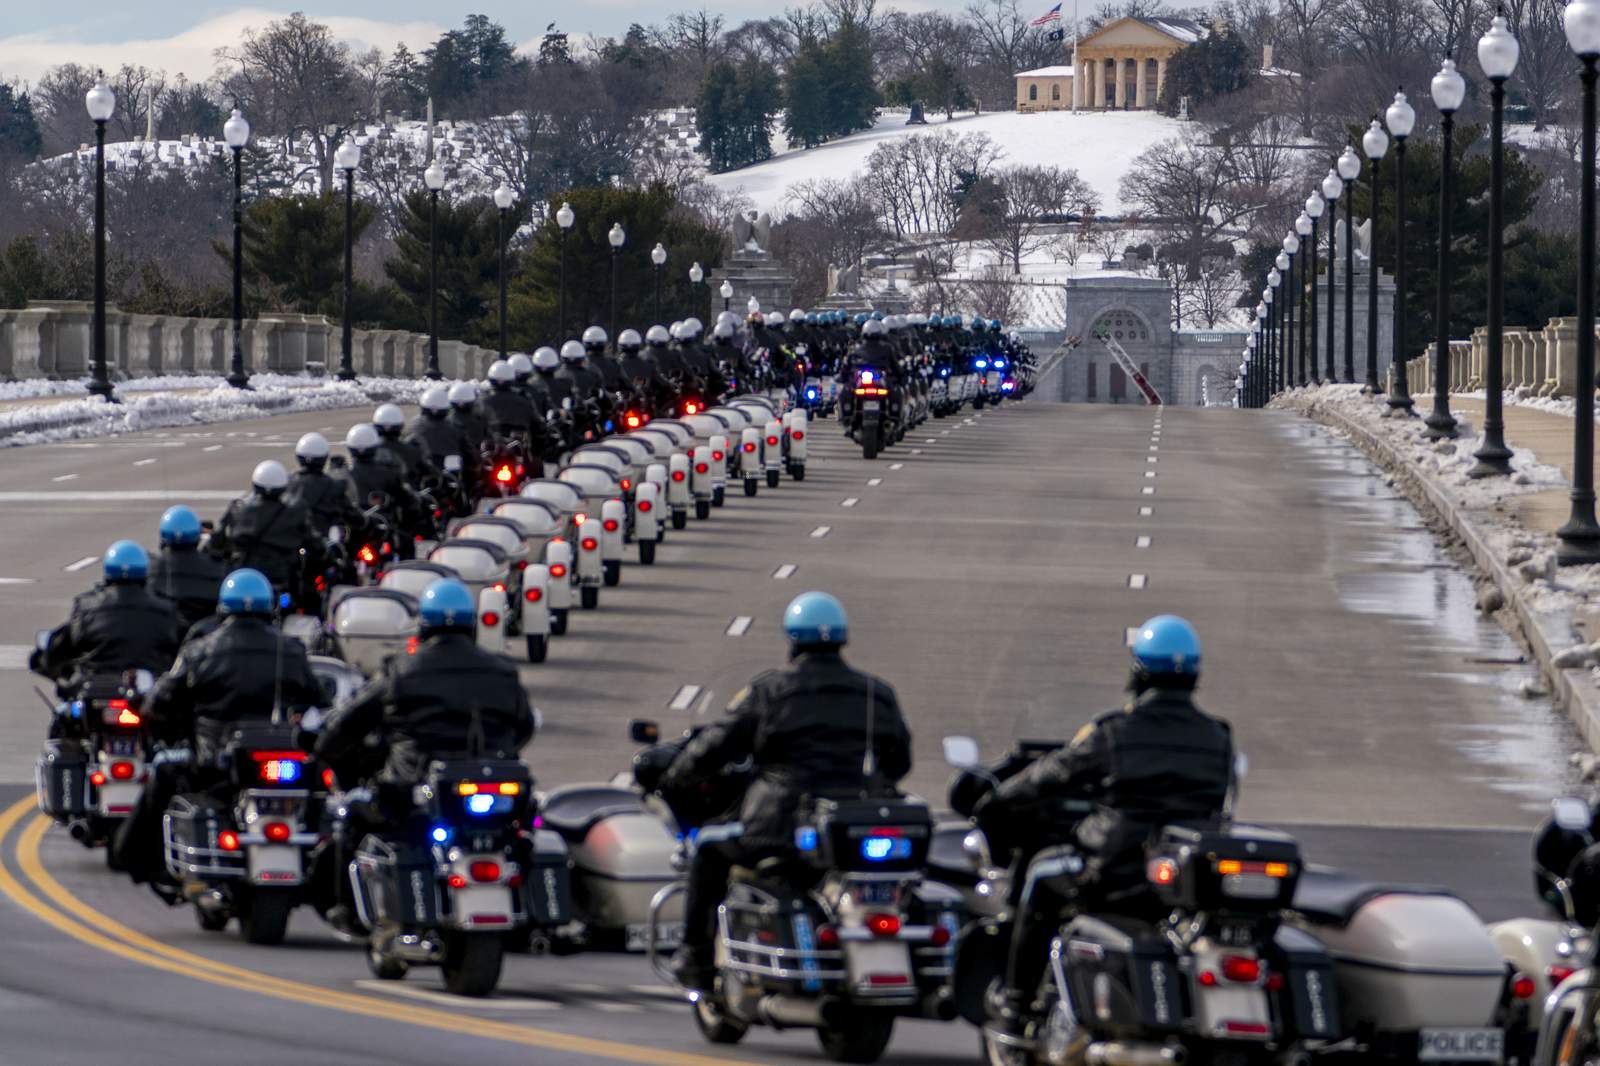 Biden, Harris pay respects to Capitol officer killed in riot